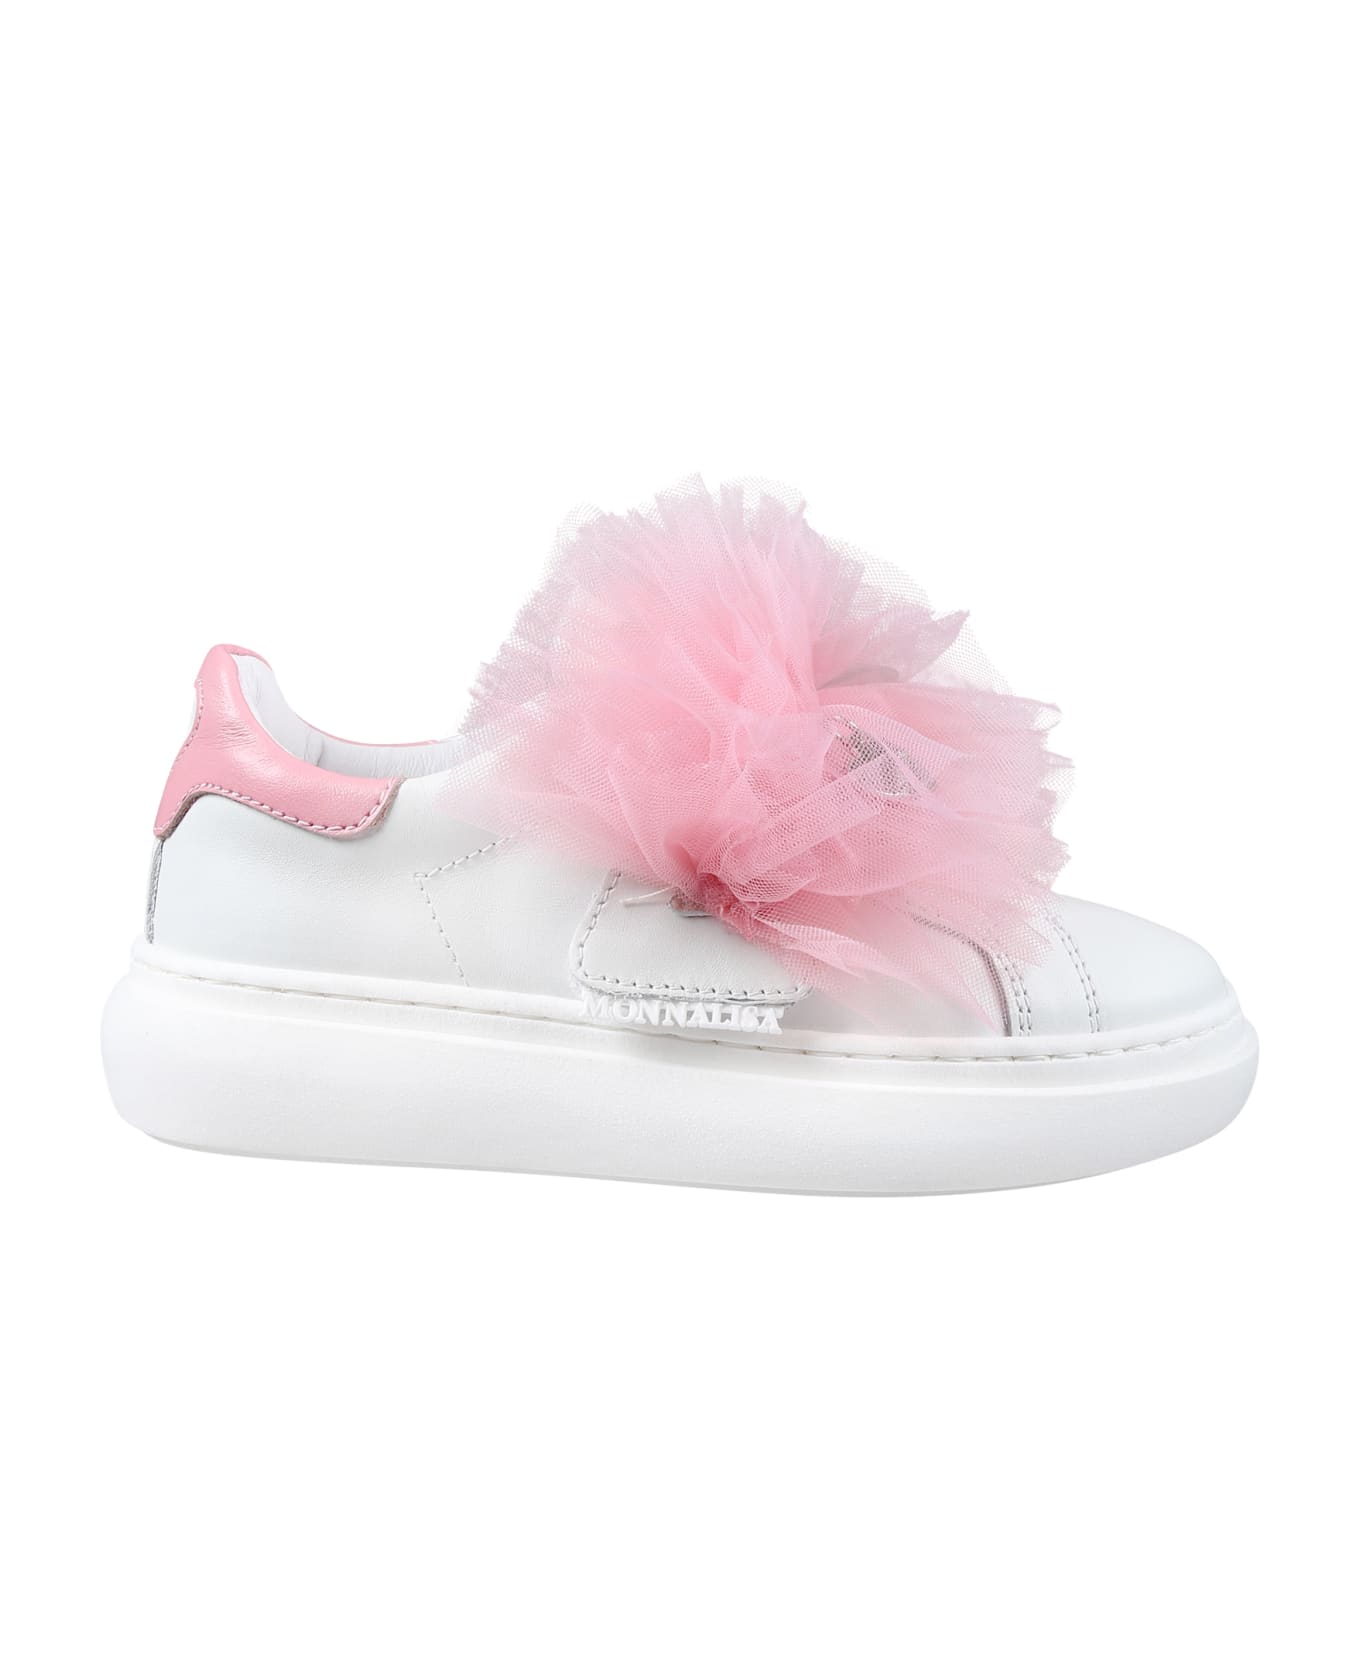 Monnalisa Pink Low Sneakers For Girl With Tulle - White シューズ